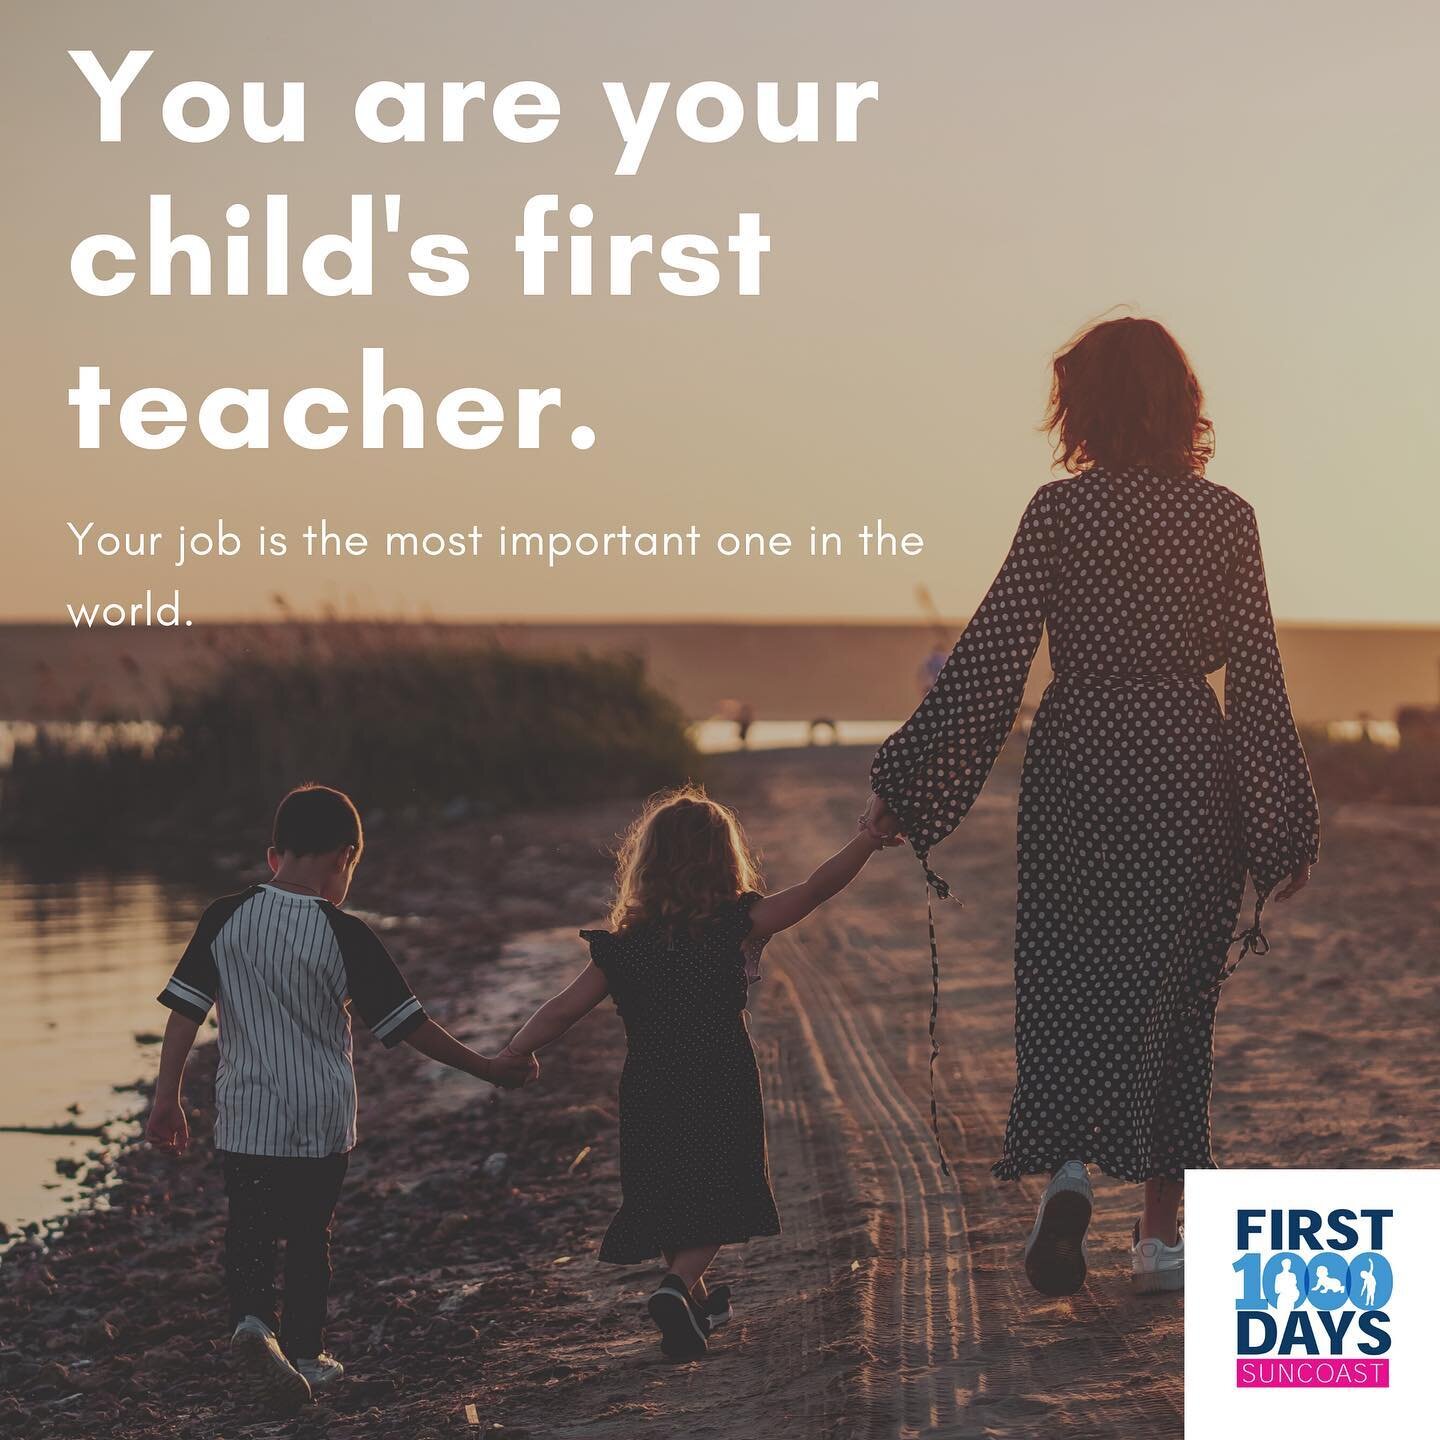 Calling all parents and caregivers,
You are your child&rsquo;s first teacher, let us help you by giving you the tools you need! Visit our website First1000DaysSuncoast.com or click the link in our bio more information!